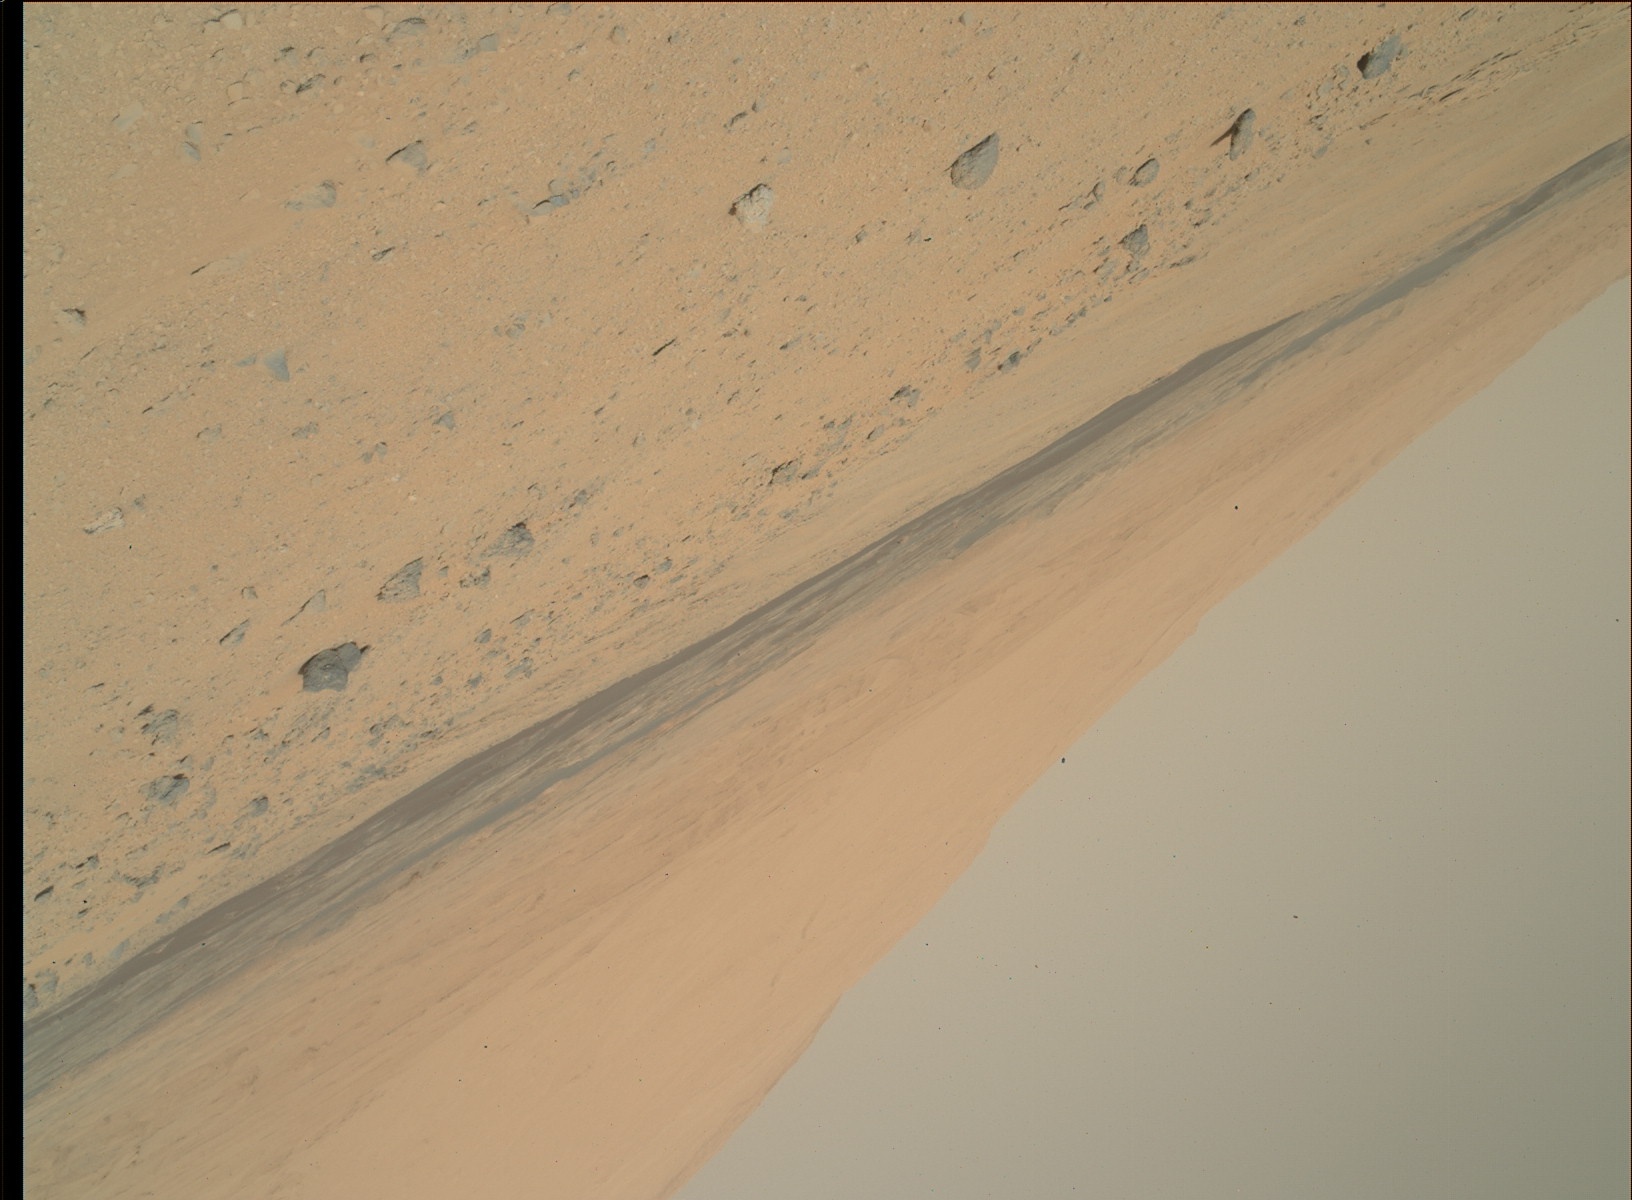 Nasa's Mars rover Curiosity acquired this image using its Mars Hand Lens Imager (MAHLI) on Sol 662